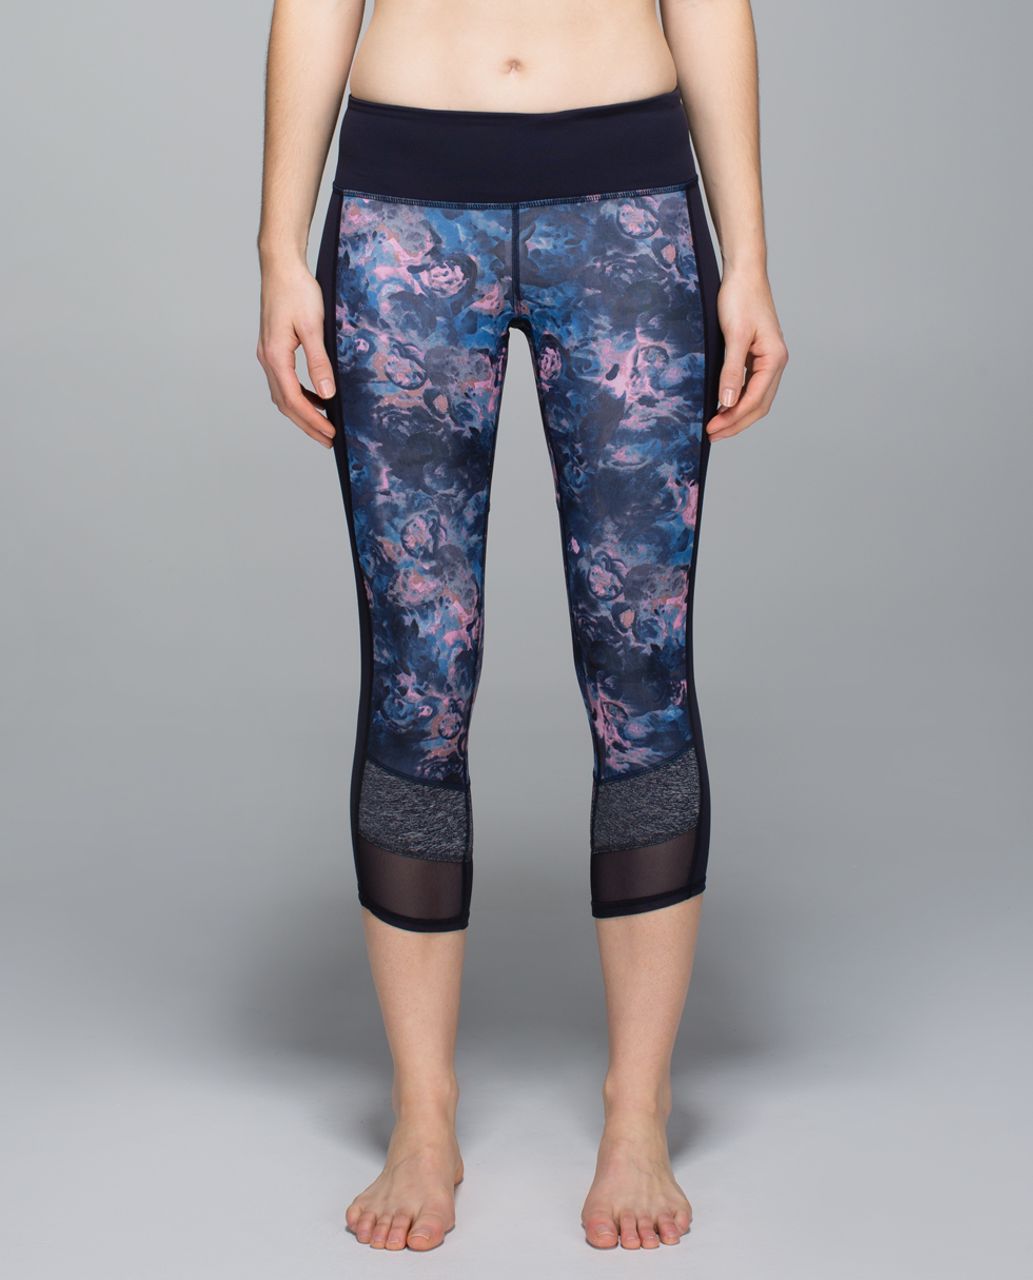 My Superficial Endeavors: Lululemon Inspire Crop in Bumble Berry!